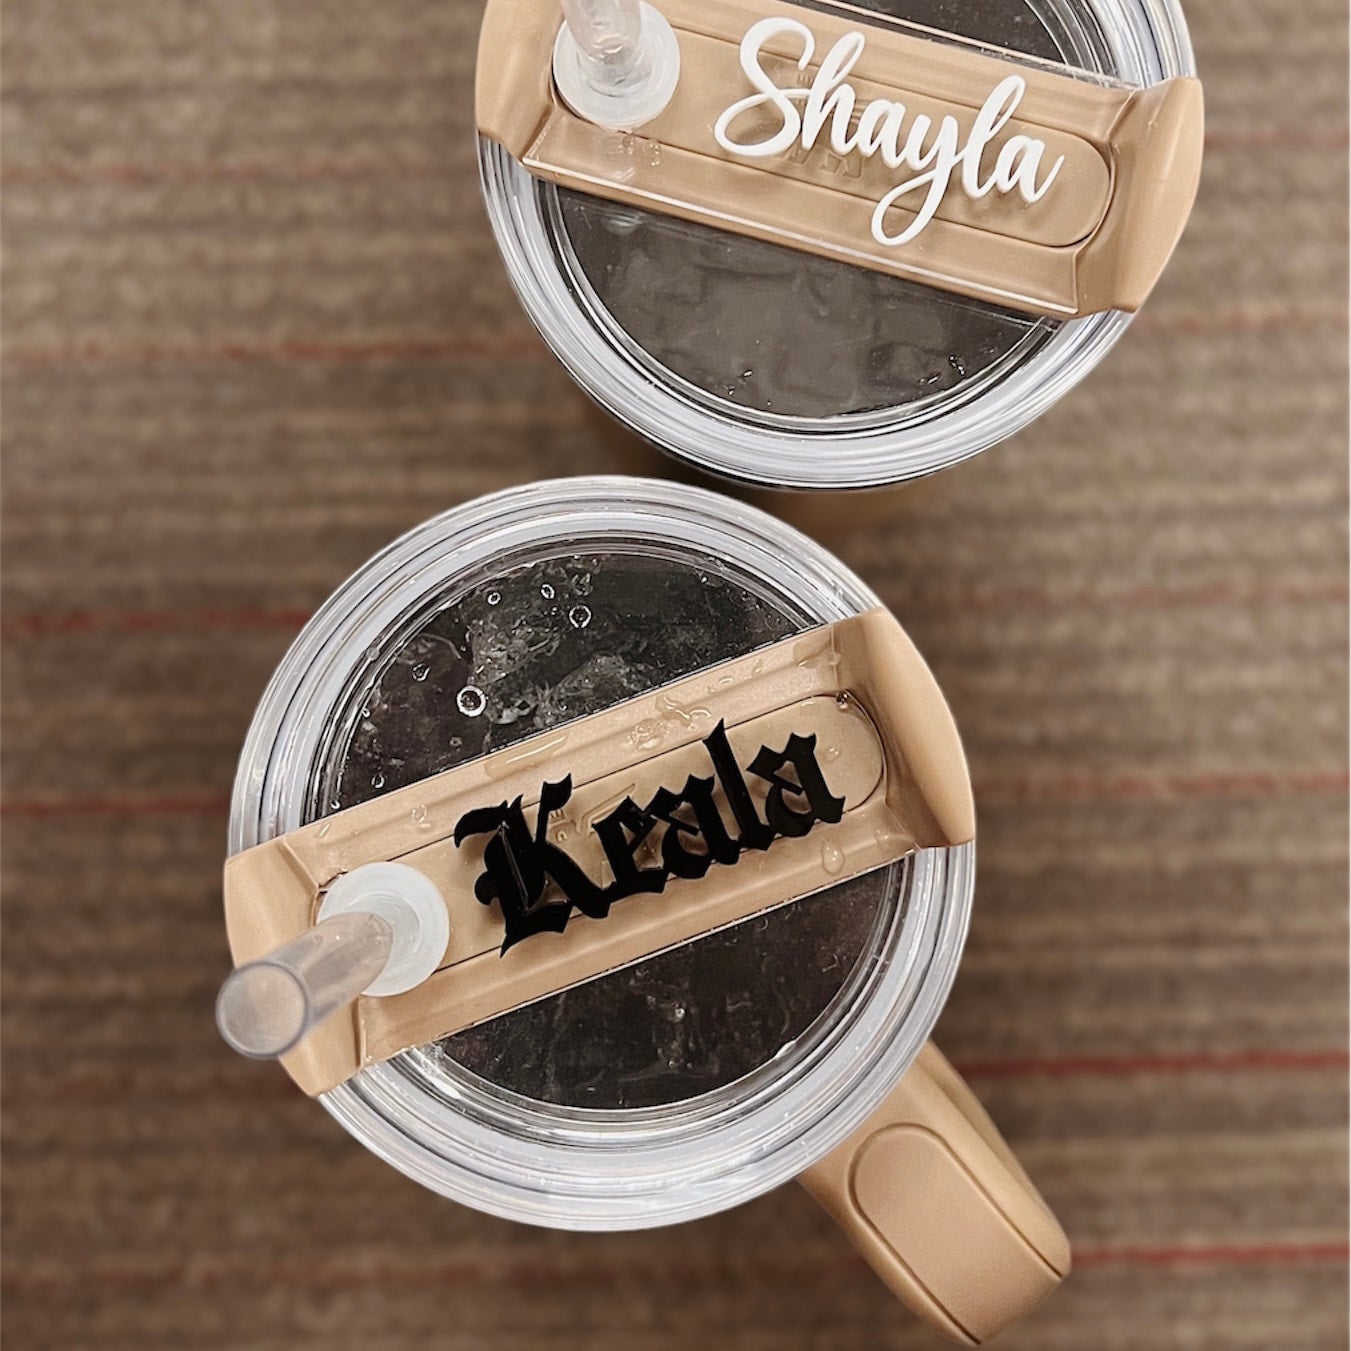 Stanley Cup Name Plate, Stanley Name Tag, Personalized Tumbler